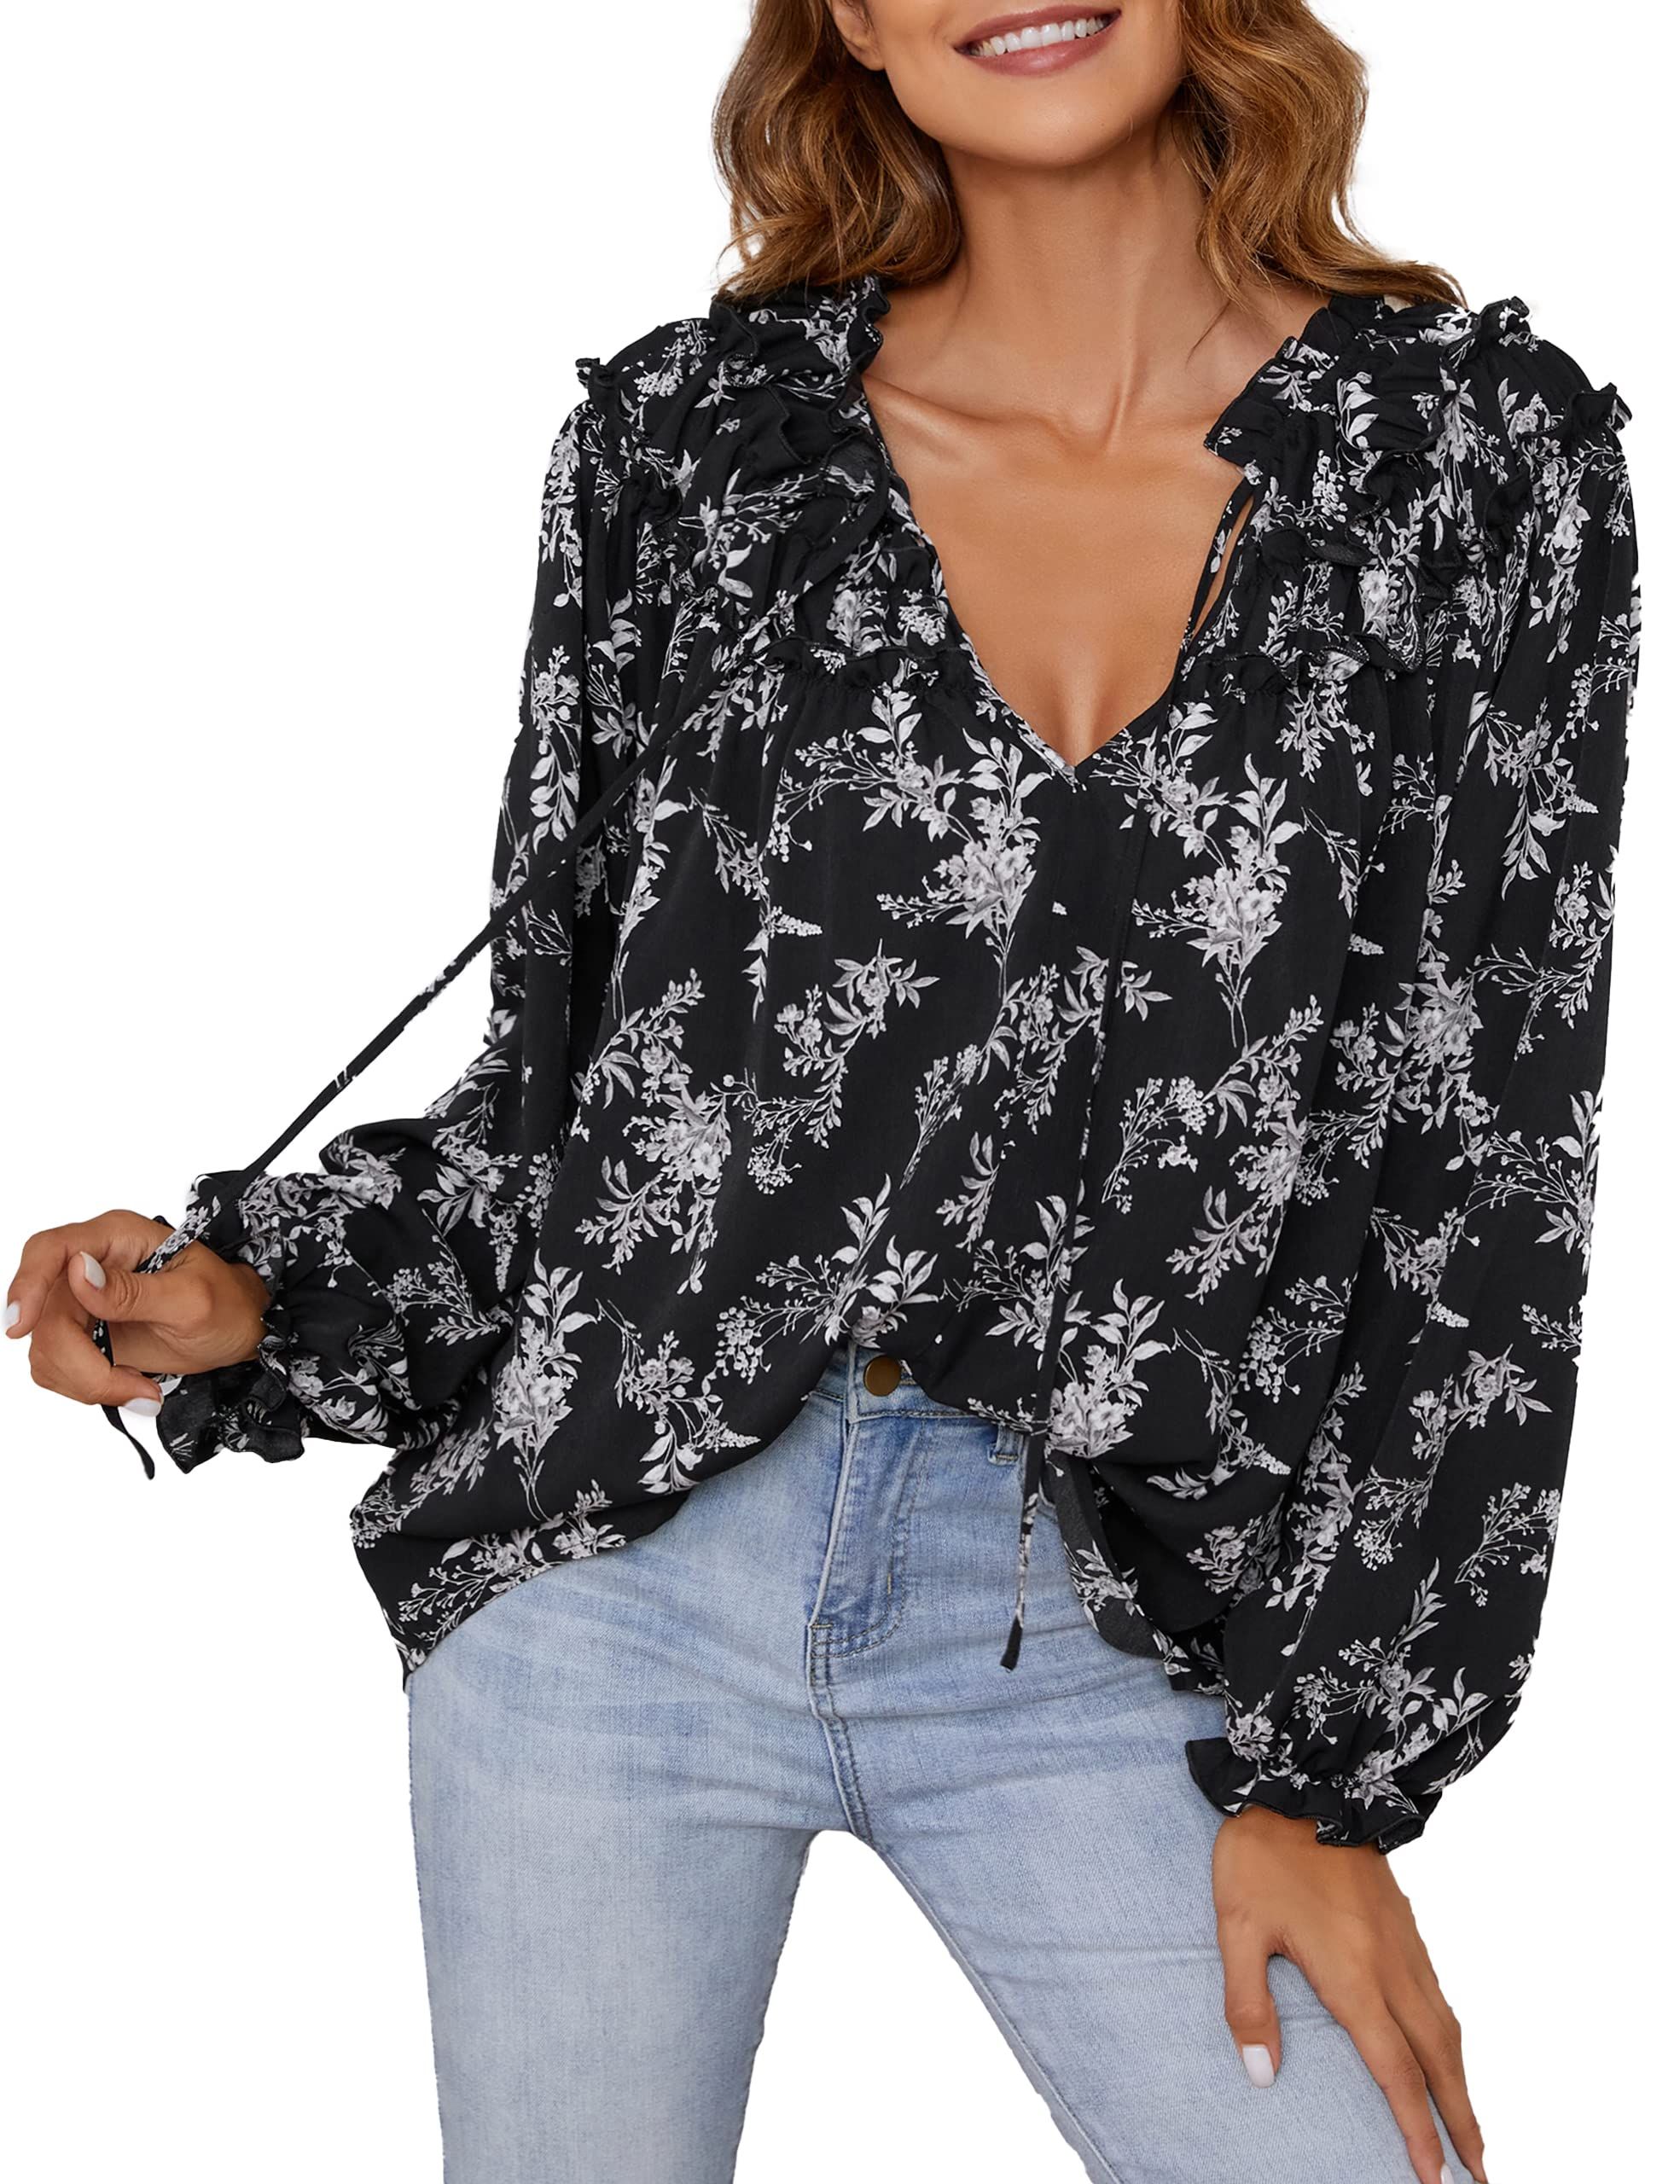 Must-Have Dressy Blouses for Every
Occasion